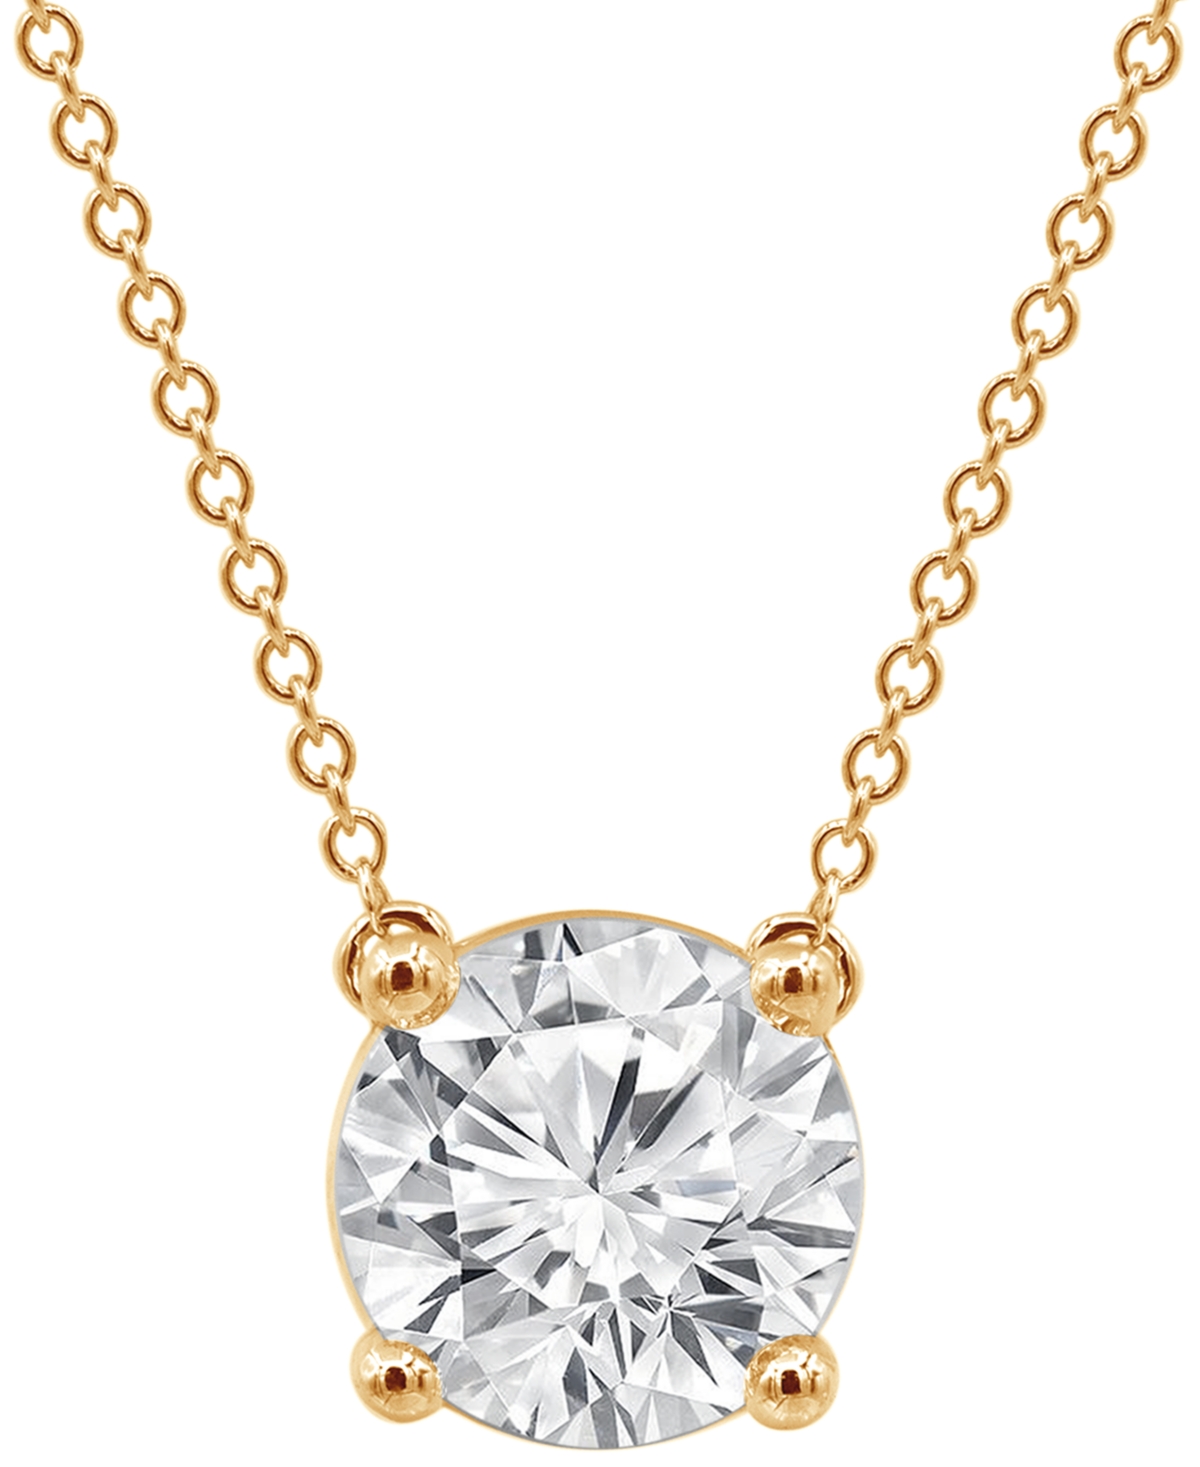 Certified Lab Grown Diamond Solitaire 18" Pendant Necklace (3 ct. t.w.) in 14k Gold - White Gold